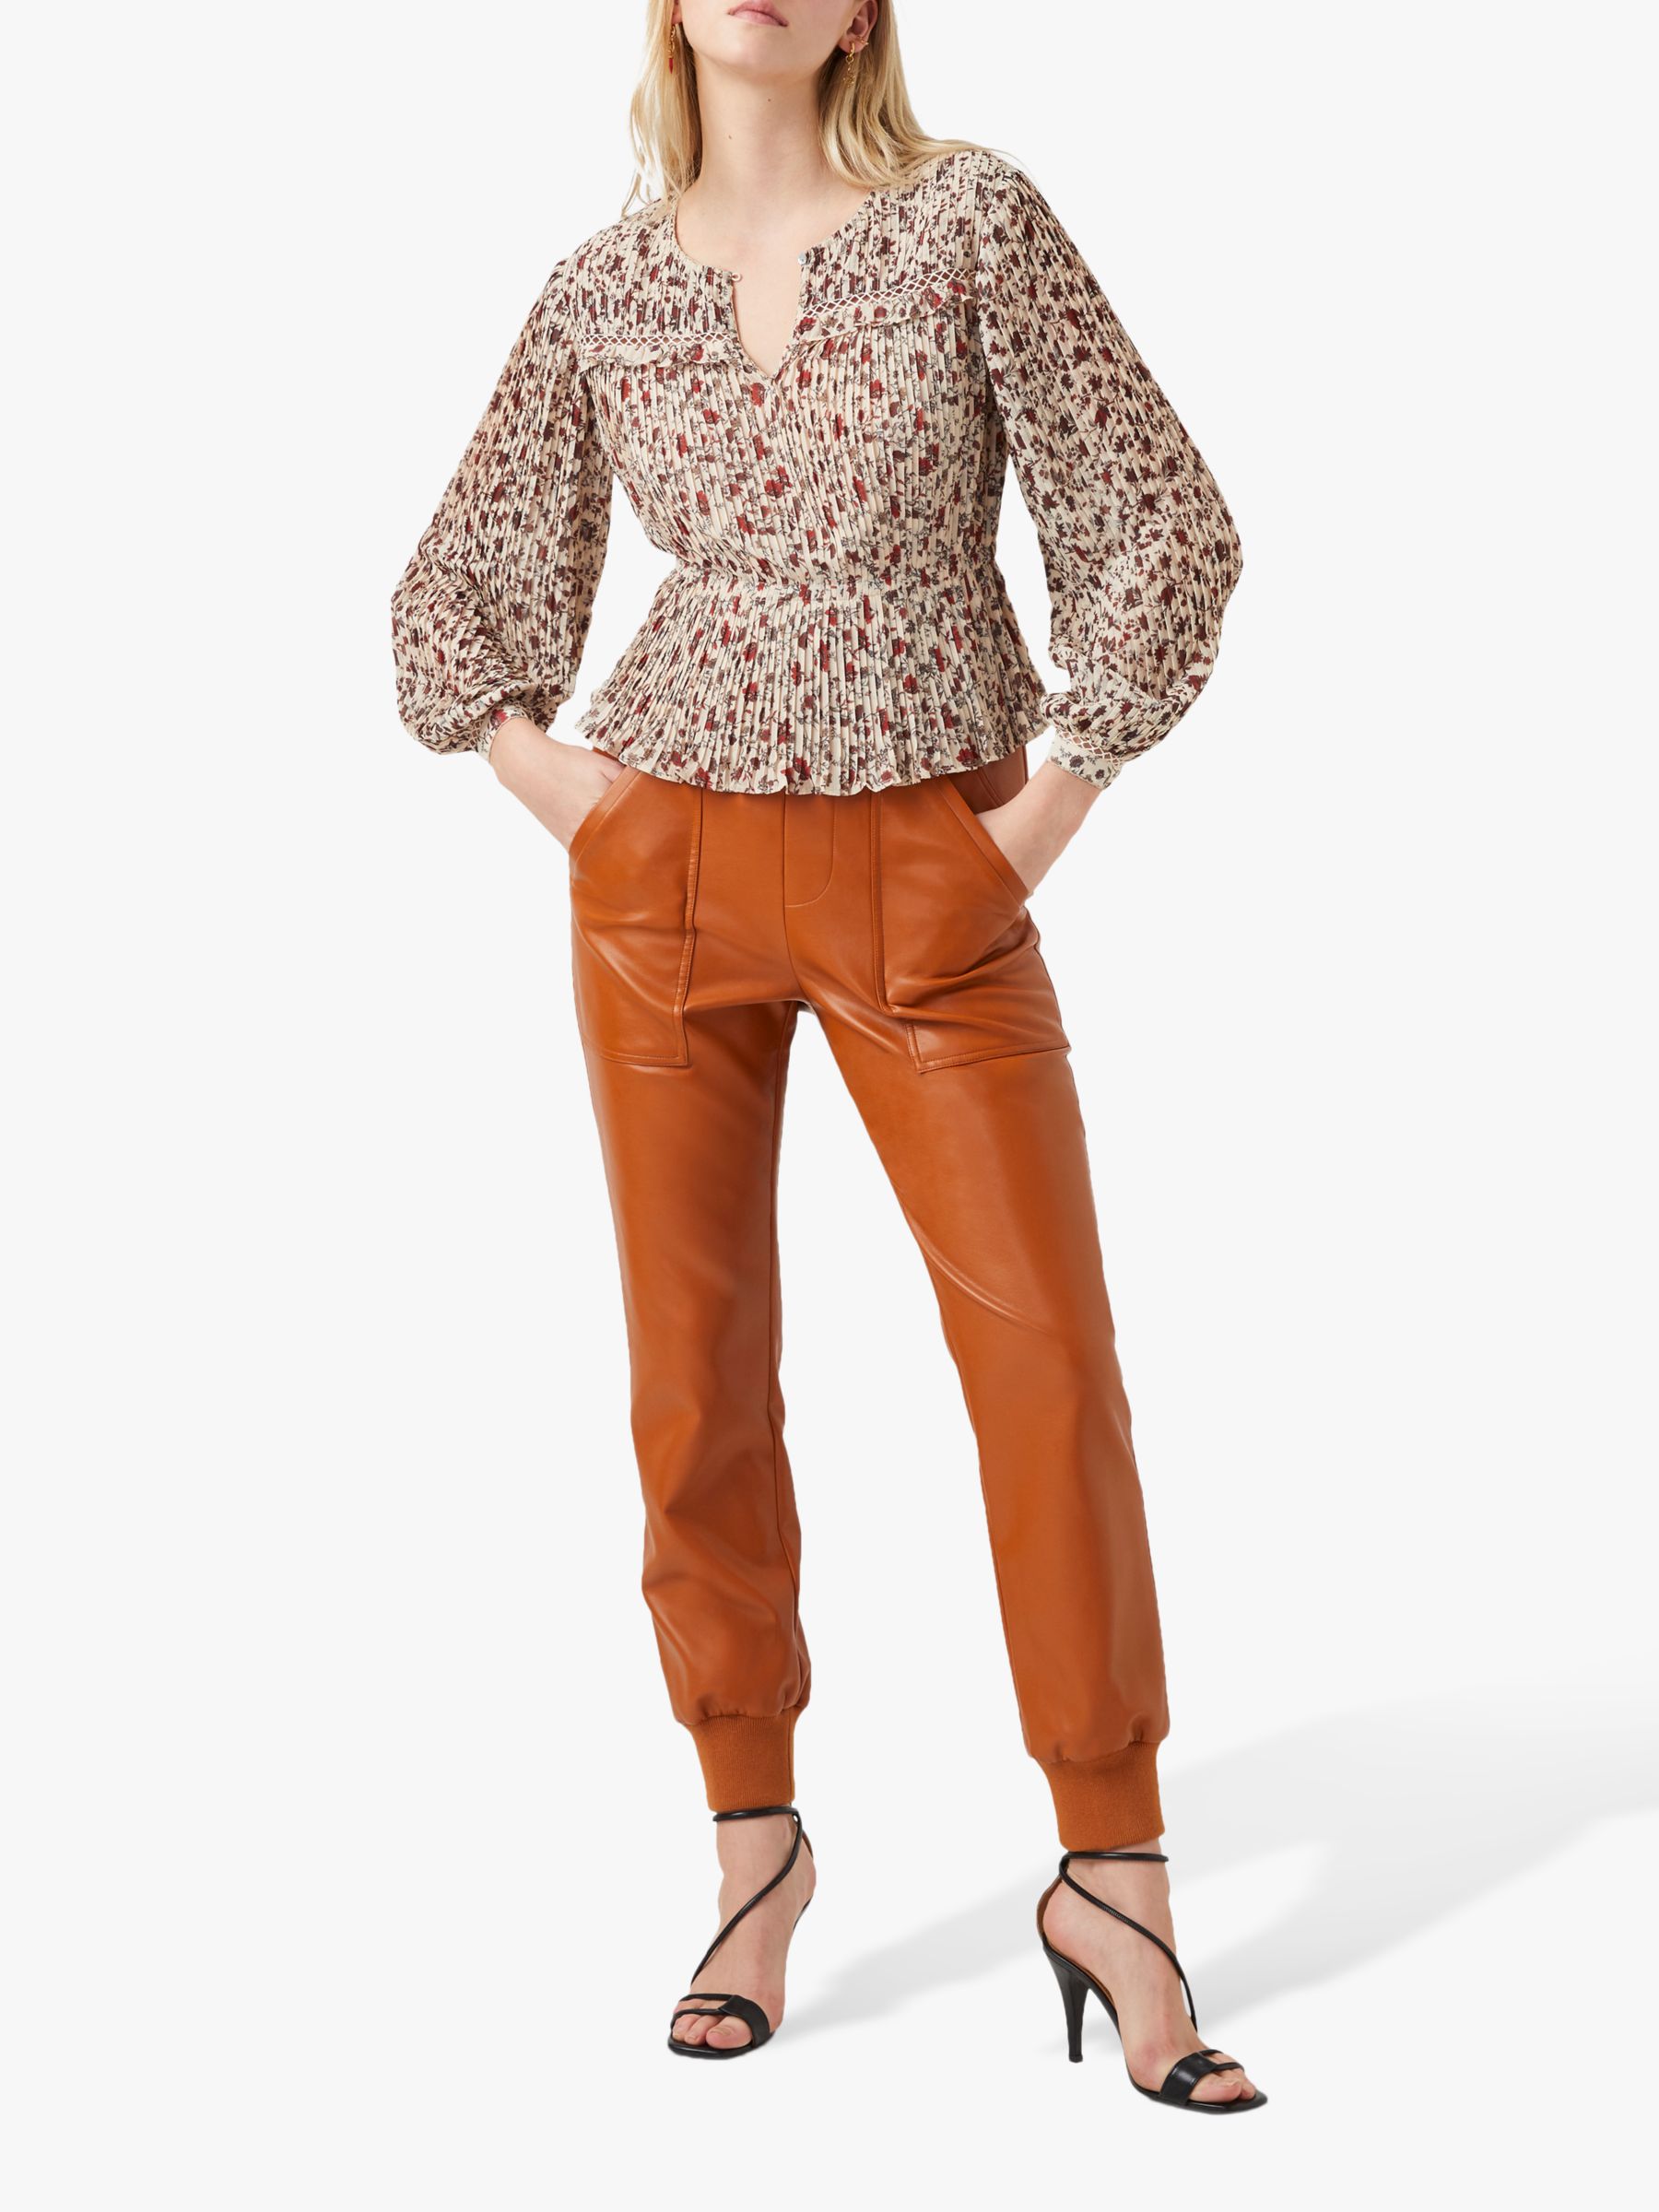 Buy French Connection Alison Floral Top, Cream/Multi Online at johnlewis.com